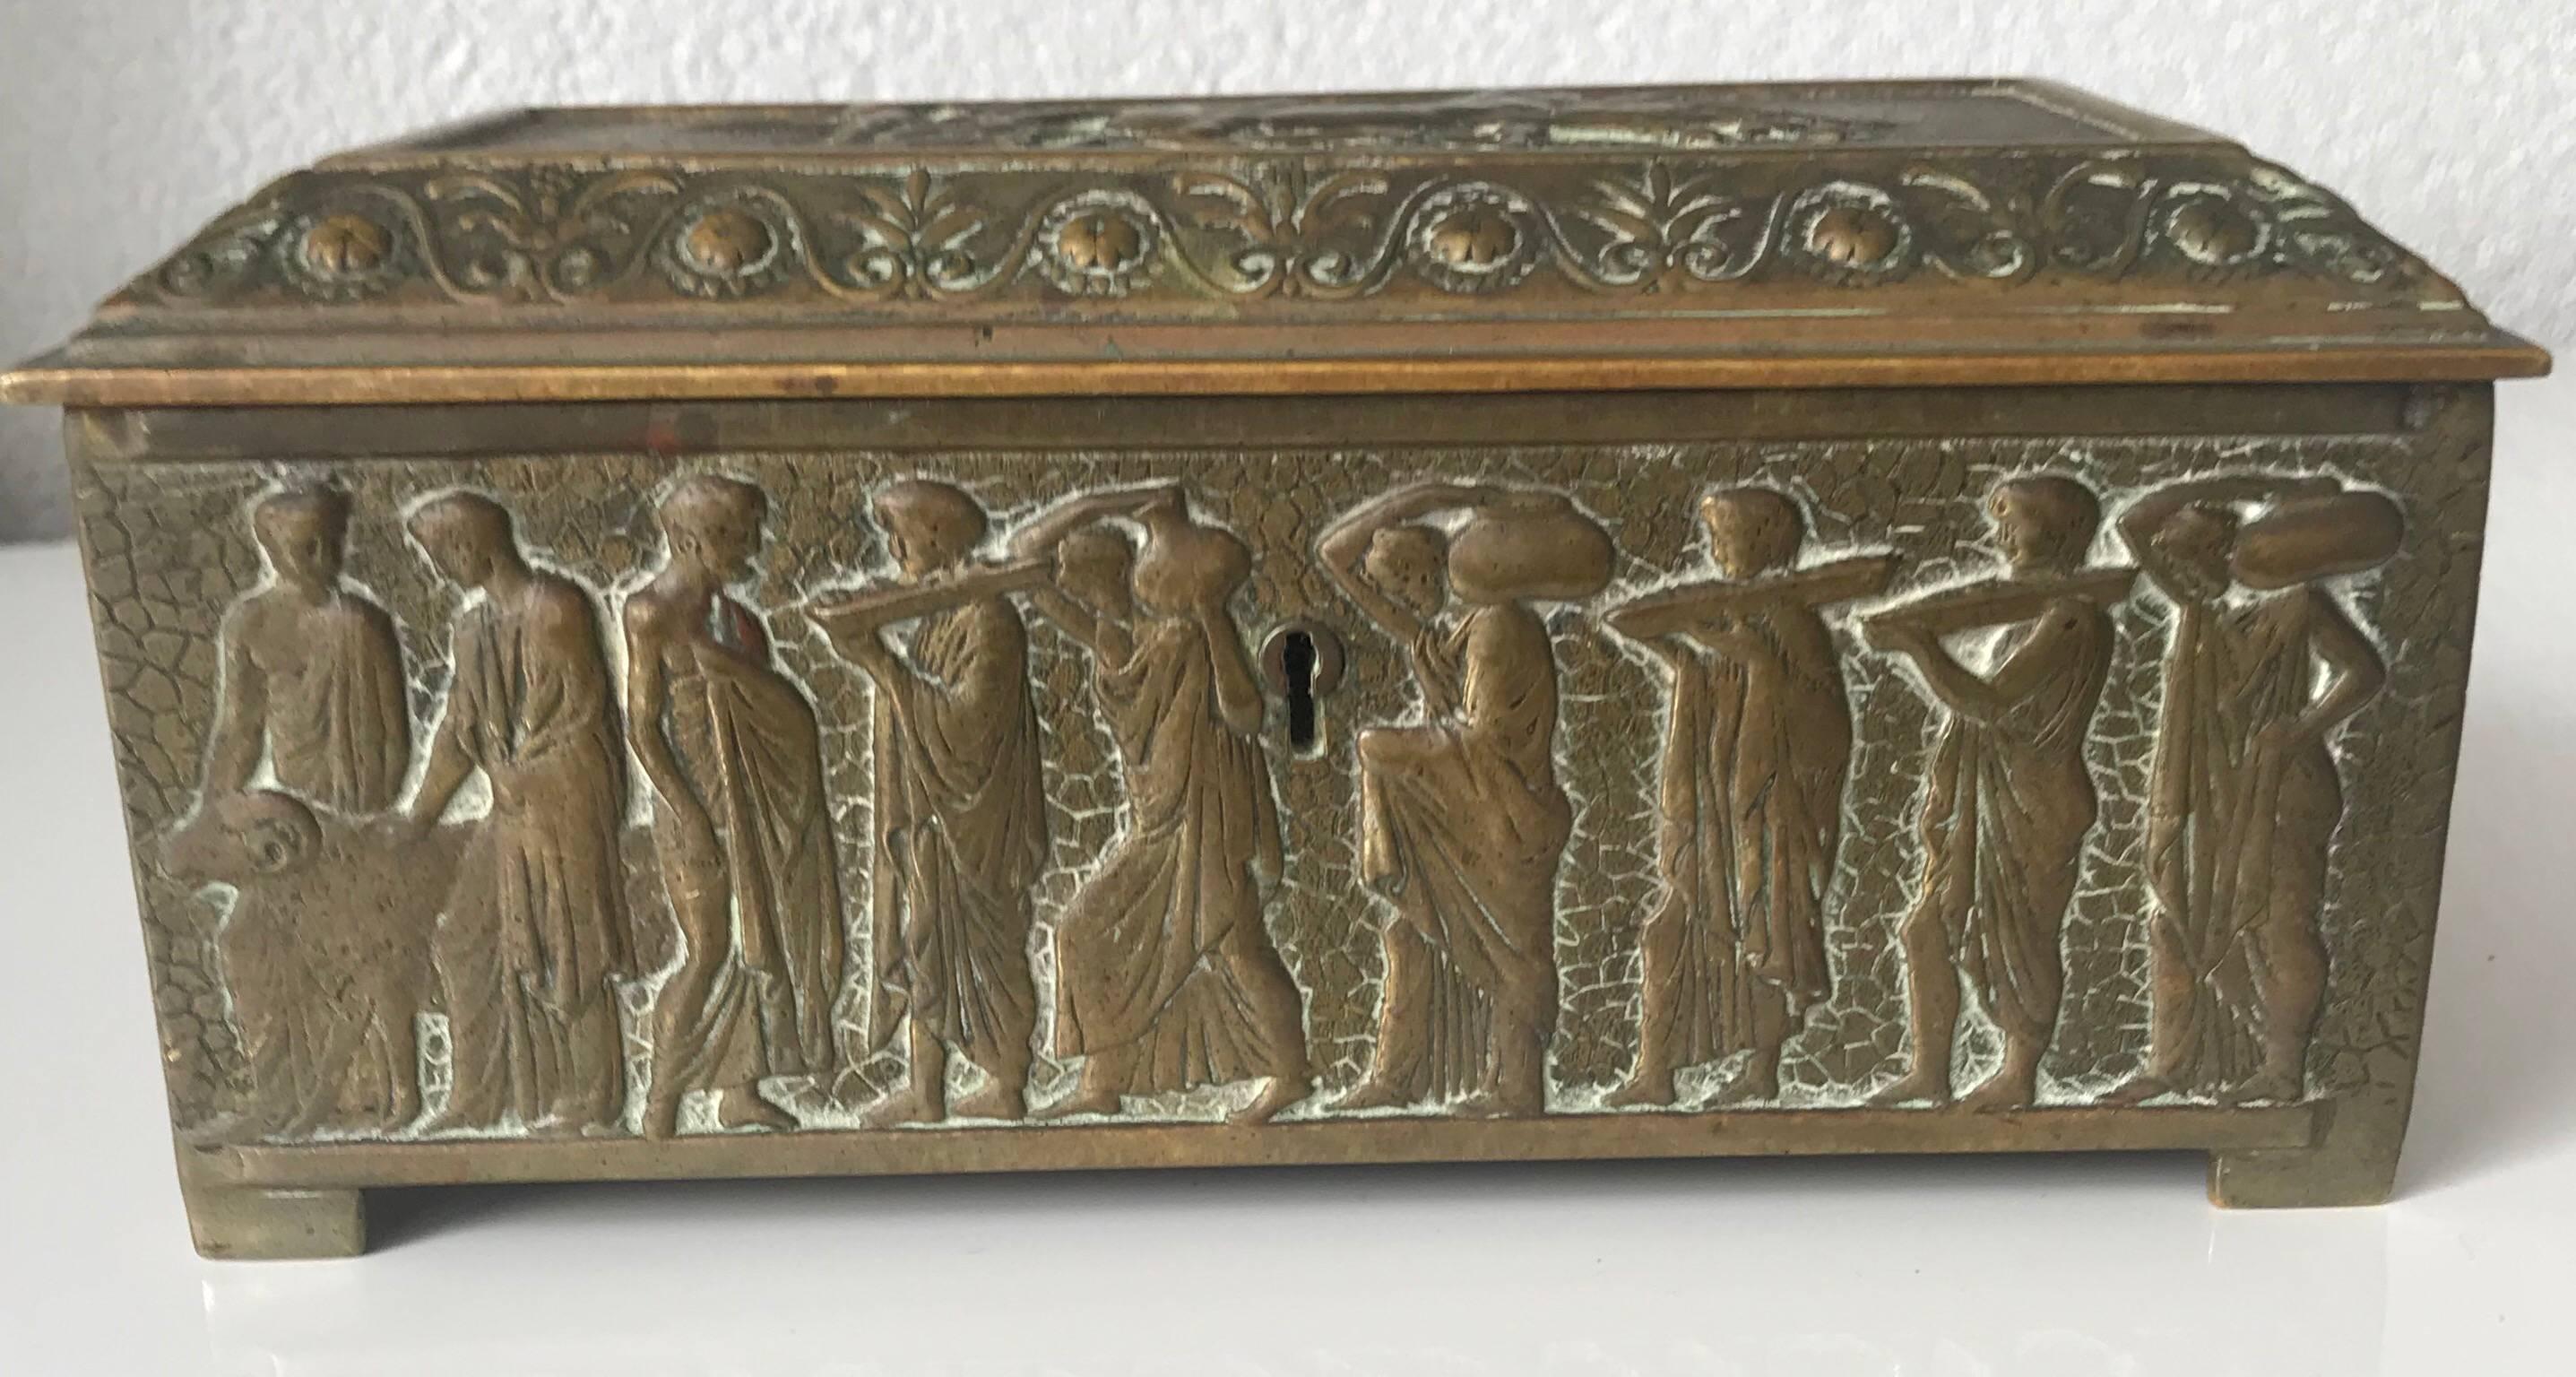 Good quality antique box with Roman scenes on all four sides and on top.

If you are a collector or enthousiast of anything to do with emperial Rome then this rare, meaningful and highly decorative bronze box could be perfect for you. The beautiful